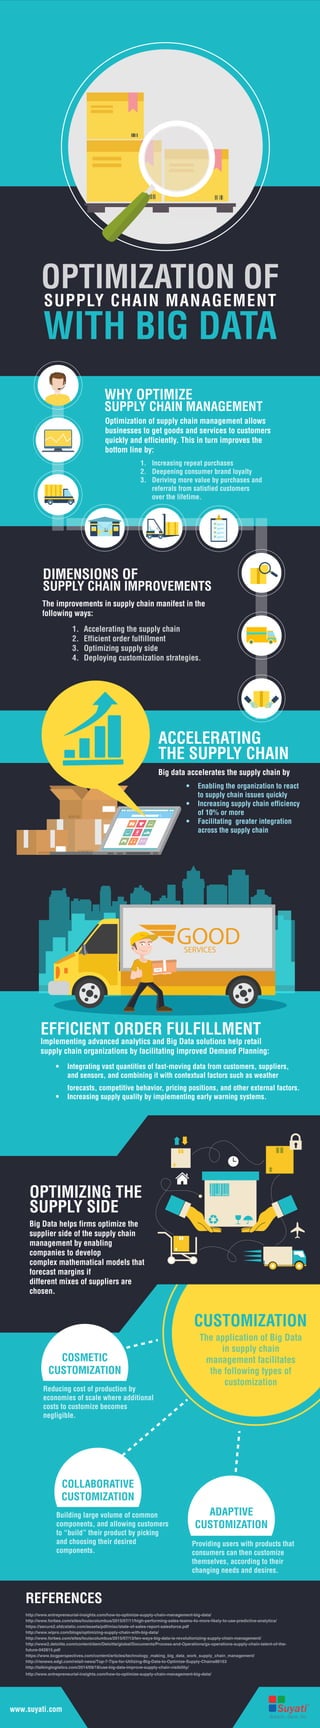 OPTIMIZATION OF
SUPPLY CHAIN MANAGEMENT
WITH BIG DATA
WHY OPTIMIZE
SUPPLY CHAIN MANAGEMENT
DIMENSIONS OF
SUPPLY CHAIN IMPROVEMENTS
Optimization of supply chain management allows
businesses to get goods and services to customers
quickly and efficiently. This in turn improves the
bottom line by:
The improvements in supply chain manifest in the
following ways:
1. Increasing repeat purchases
2. Deepening consumer brand loyalty
3. Deriving more value by purchases and
referrals from satisfied customers
over the lifetime.
1. Accelerating the supply chain
2. Efficient order fulfillment
3. Optimizing supply side
4. Deploying customization strategies.
EFFICIENT ORDER FULFILLMENT
Implementing advanced analytics and Big Data solutions help retail
supply chain organizations by facilitating improved Demand Planning:
GOODSERVICES
FASTDELIVERY
Big data accelerates the supply chain by
• Enabling the organization to react
to supply chain issues quickly
• Increasing supply chain efficiency
of 10% or more
• Facilitating greater integration
across the supply chain
ACCELERATING
THE SUPPLY CHAIN
The application of Big Data
in supply chain
management facilitates
the following types of
customization
ADAPTIVE
CUSTOMIZATION
COLLABORATIVE
CUSTOMIZATION
Building large volume of common
components, and allowing customers
to “build” their product by picking
and choosing their desired
components.
Providing users with products that
consumers can then customize
themselves, according to their
changing needs and desires.
REFERENCES
http://www.entrepreneurial-insights.com/how-to-optimize-supply-chain-management-big-data/
http://www.forbes.com/sites/louiscolumbus/2015/07/11/high-performing-sales-teams-4x-more-likely-to-use-predictive-analytics/
https://secure2.sfdcstatic.com/assets/pdf/misc/state-of-sales-report-salesforce.pdf
http://www.wipro.com/blogs/optimizing-supply-chain-with-big-data/
http://www.forbes.com/sites/louiscolumbus/2015/07/13/ten-ways-big-data-is-revolutionizing-supply-chain-management/
http://www2.deloitte.com/content/dam/Deloitte/global/Documents/Process-and-Operations/gx-operations-supply-chain-talent-of-the-
future-042815.pdf
https://www.bcgperspectives.com/content/articles/technology_making_big_data_work_supply_chain_management/
http://risnews.edgl.com/retail-news/Top-7-Tips-for-Utilizing-Big-Data-to-Optimize-Supply-Chains86163
http://talkinglogistics.com/2014/09/18/use-big-data-improve-supply-chain-visibility/
http://www.entrepreneurial-insights.com/how-to-optimize-supply-chain-management-big-data/
CUSTOMIZATION
OPTIMIZING THE
SUPPLY SIDE
Big Data helps firms optimize the
supplier side of the supply chain
management by enabling
companies to develop
complex mathematical models that
forecast margins if
different mixes of suppliers are
chosen.
• Integrating vast quantities of fast-moving data from customers, suppliers,
and sensors, and combining it with contextual factors such as weather
forecasts, competitive behavior, pricing positions, and other external factors.
• Increasing supply quality by implementing early warning systems.
COSMETIC
CUSTOMIZATION
Reducing cost of production by
economies of scale where additional
costs to customize becomes
negligible.
www.suyati.com
 